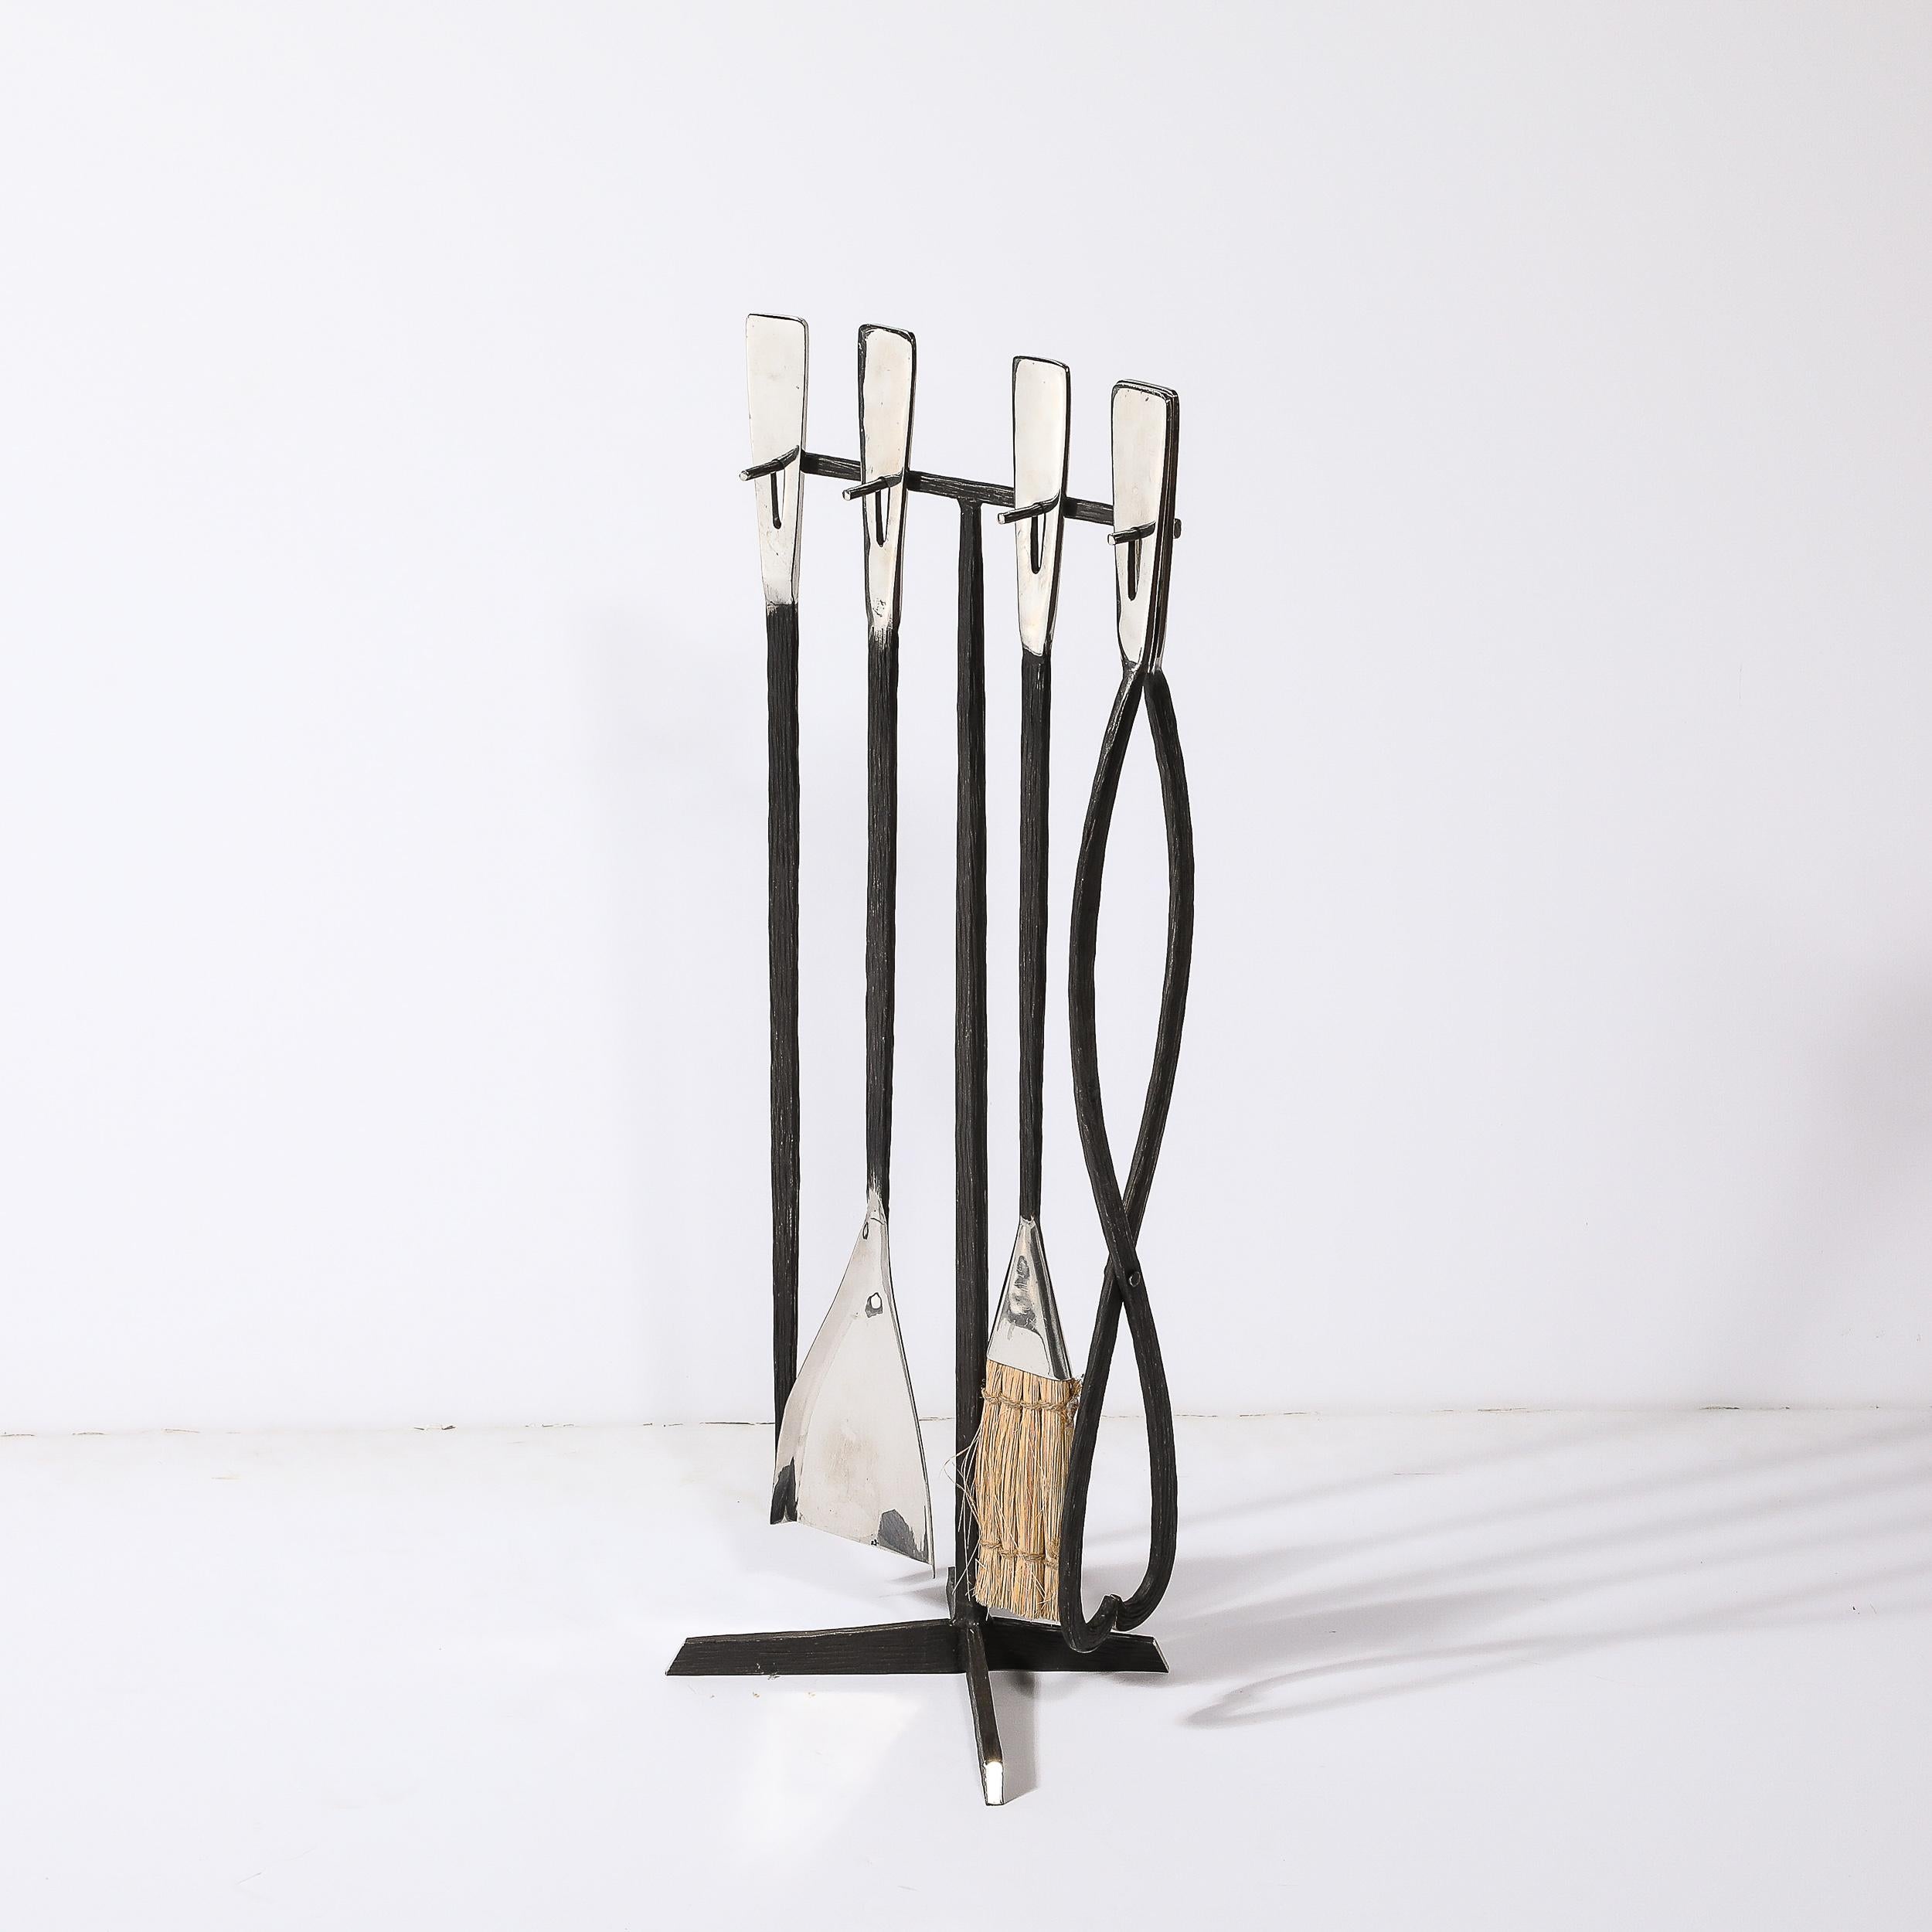 This unique and beautifully formed Modernist Hand-Forged Faux Bois Fire Tool Set in Wrought & Polished Iron originates from the United States during the latter half of the 20th Century. Featuring a minimal framework in wrought iron resting on an